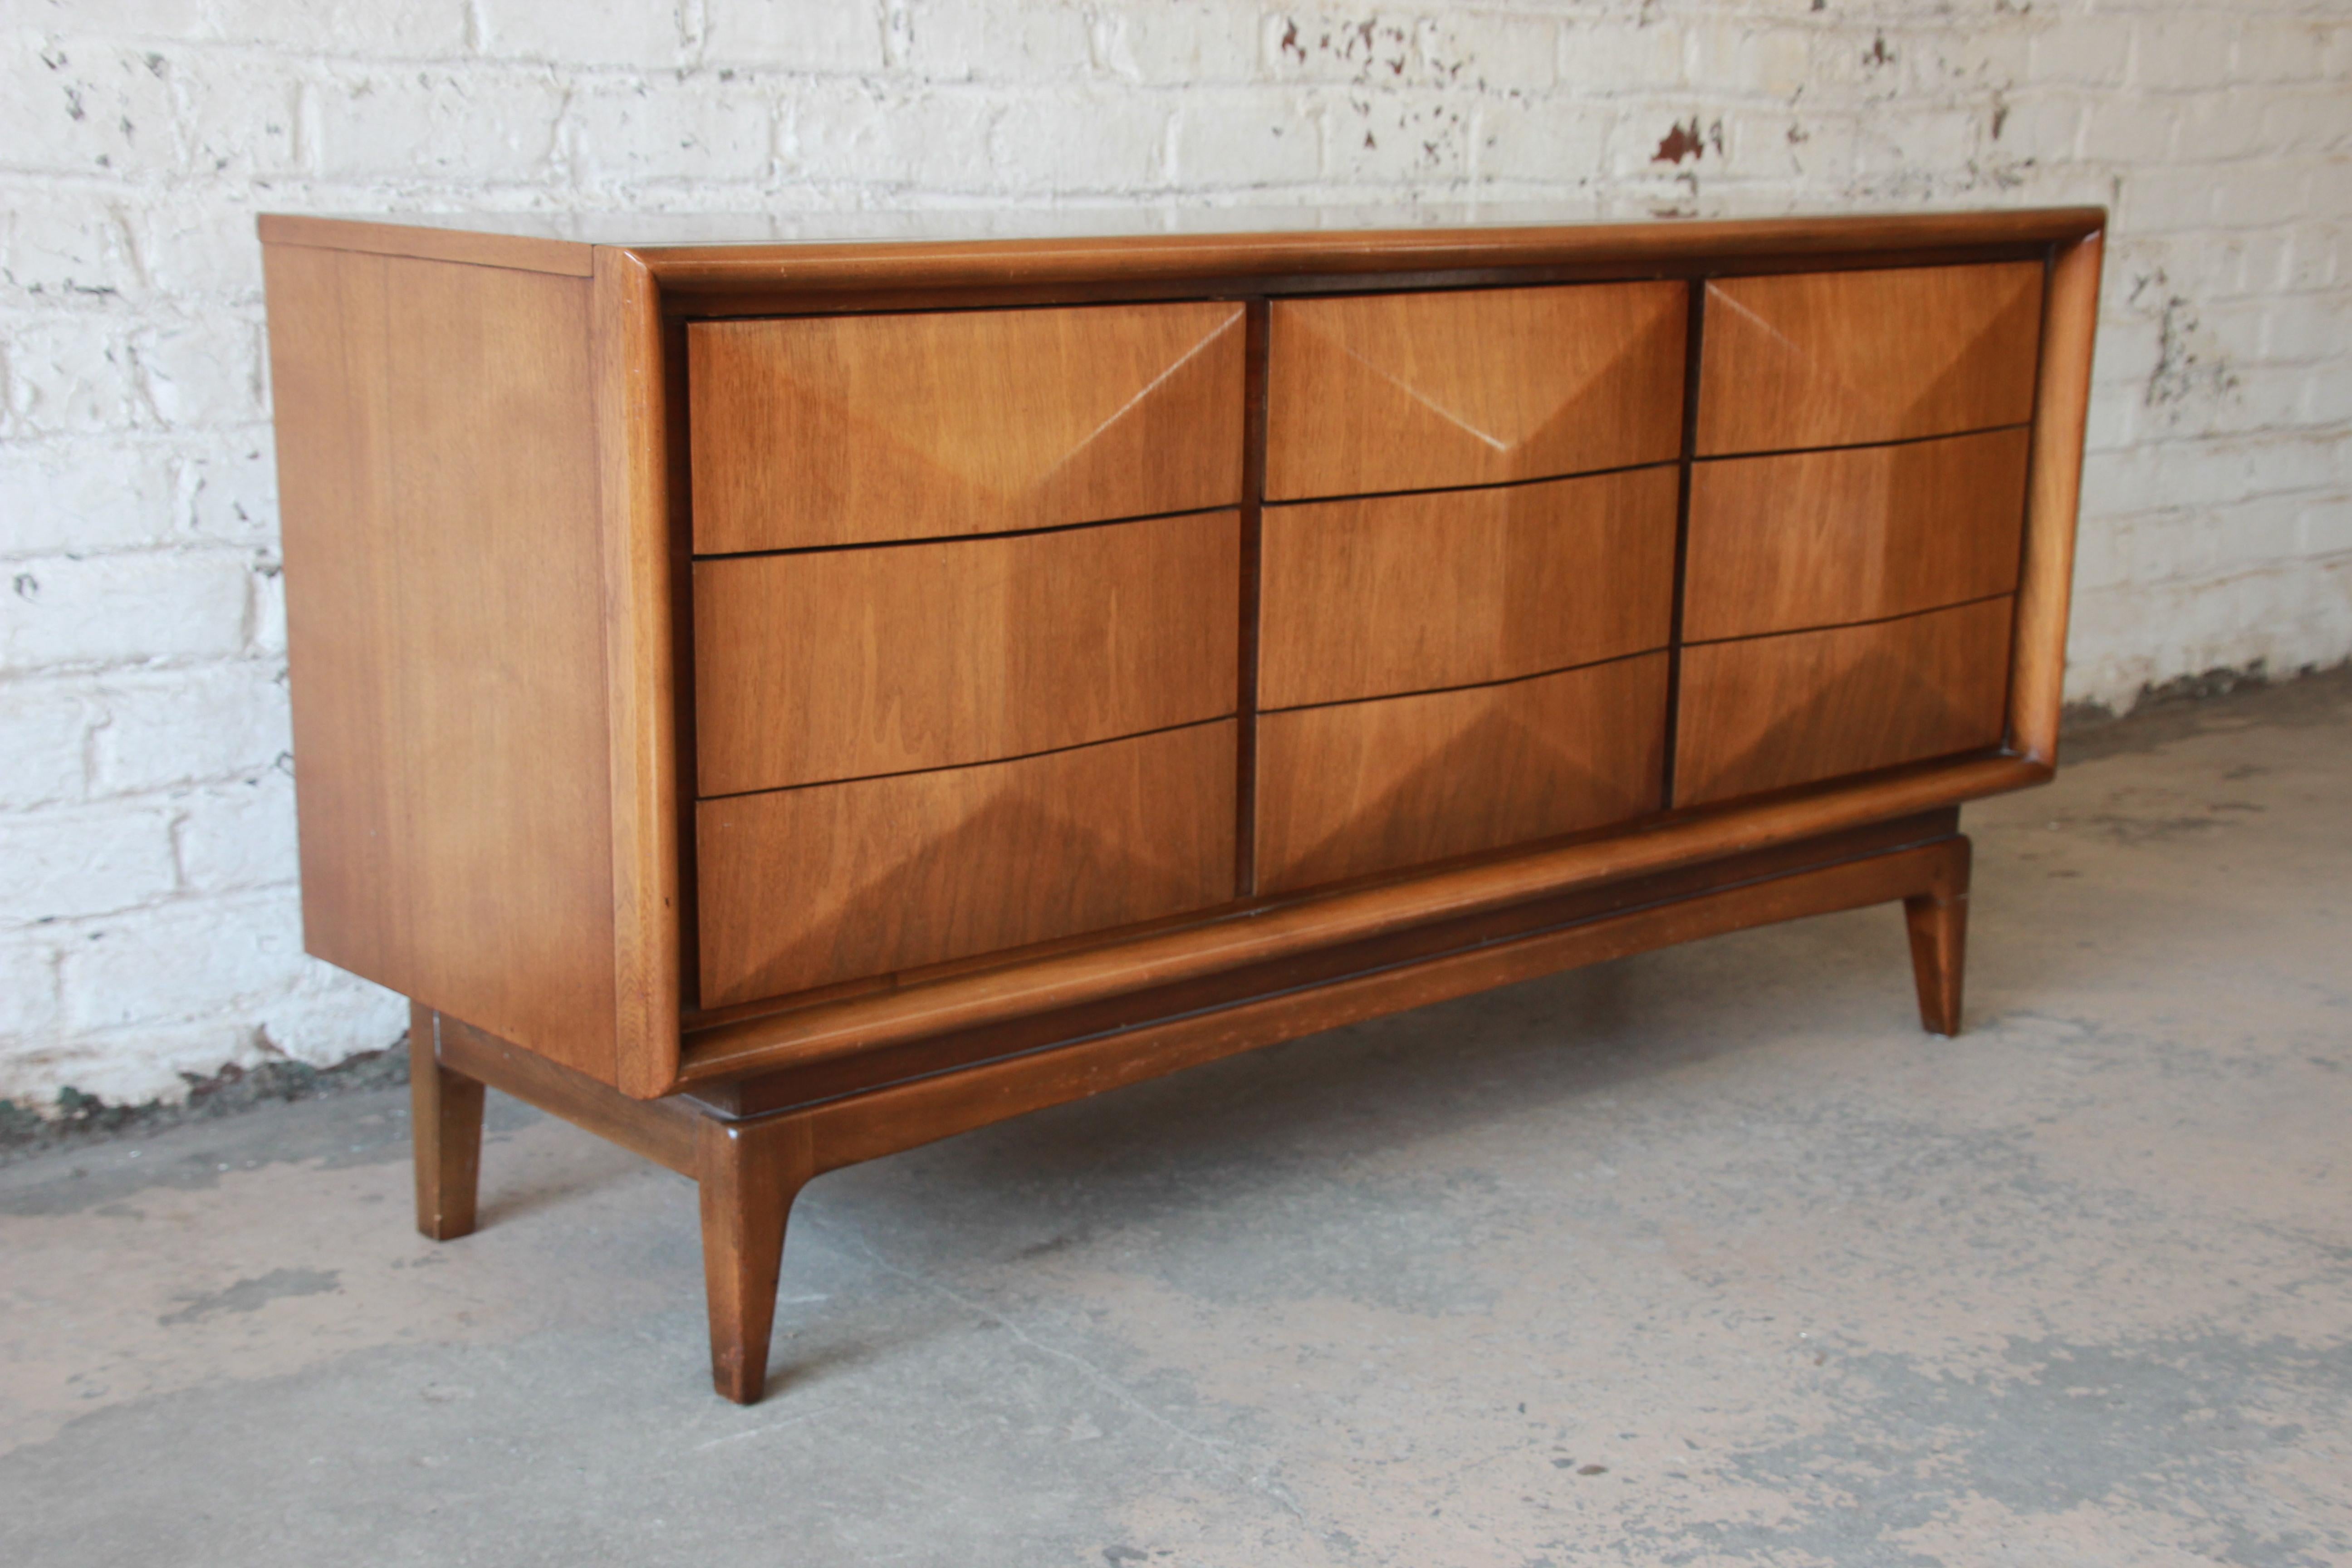 An exceptional and unique Mid-Century Modern diamond front dresser or credenza by United Furniture. The dresser features stunning walnut wood grain and a sculpted diamond front. It offers ample room for storage, with nine deep drawers. The dresser